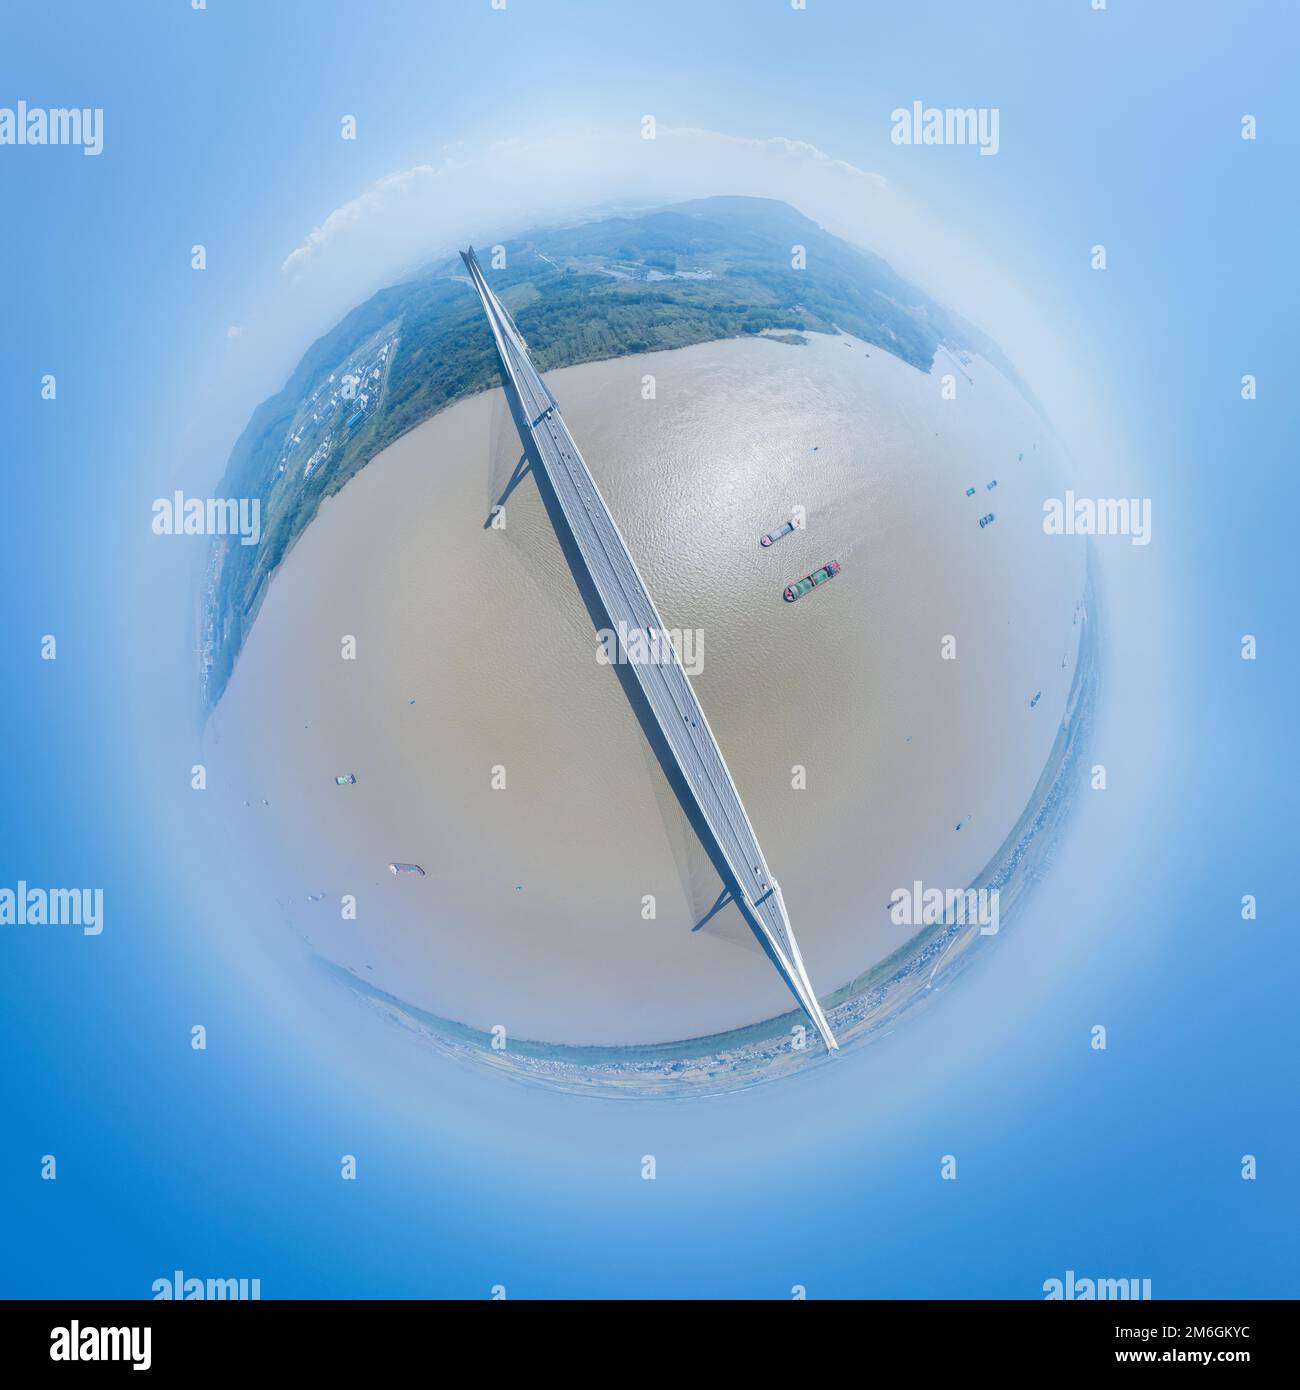 Little planet image of cable-stayed bridge over river Stock Photo